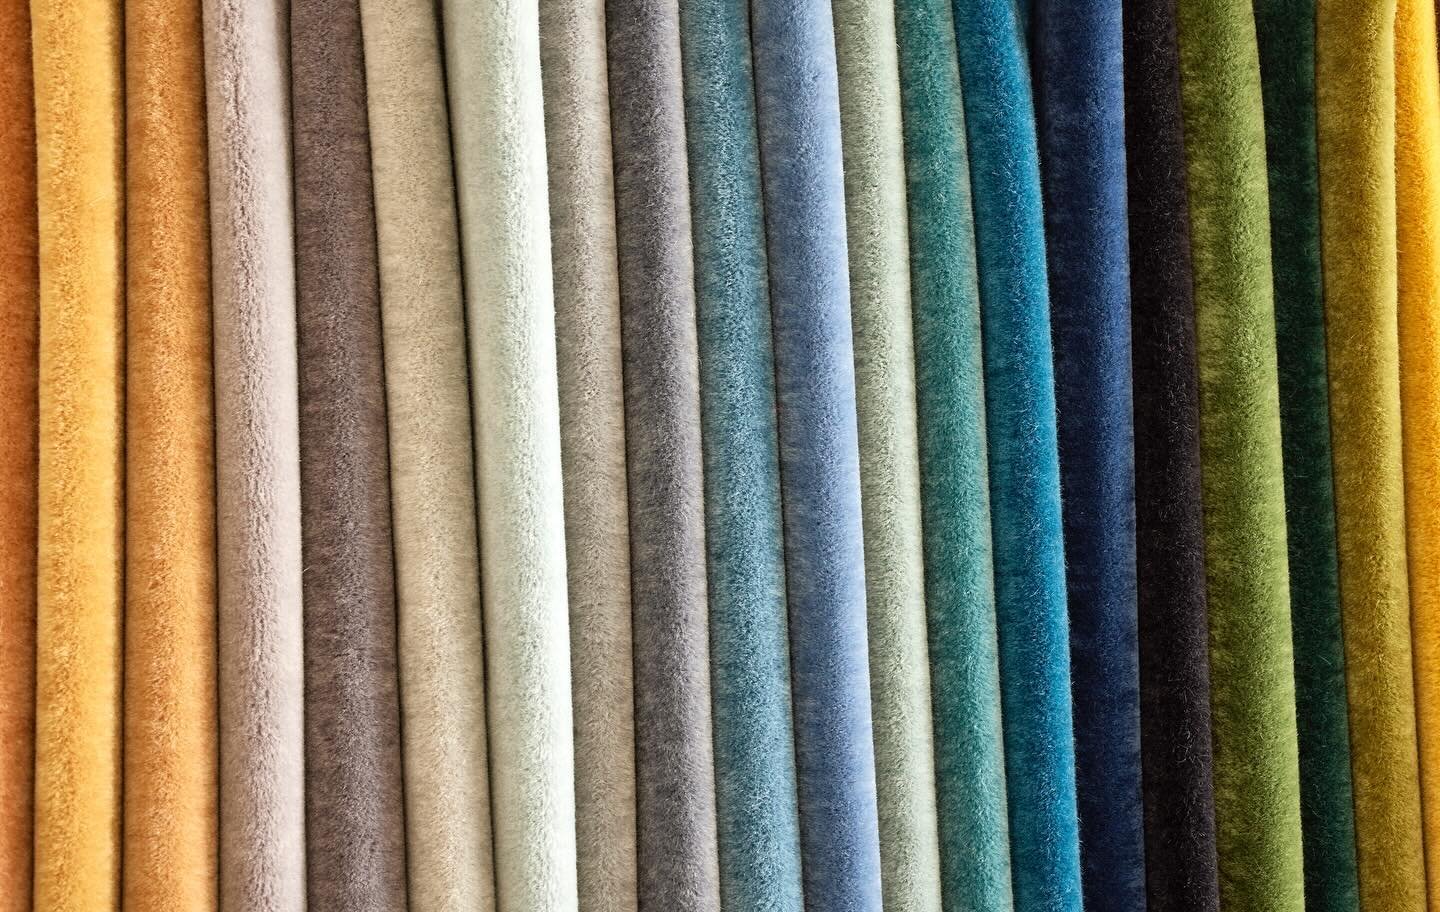 This is only a selection of the gorgeous shades of Mohair we carry at Savel. What can we help you find? 

#mohair 
#fabric
#colorinspiration 
#colorful 
#upholstery